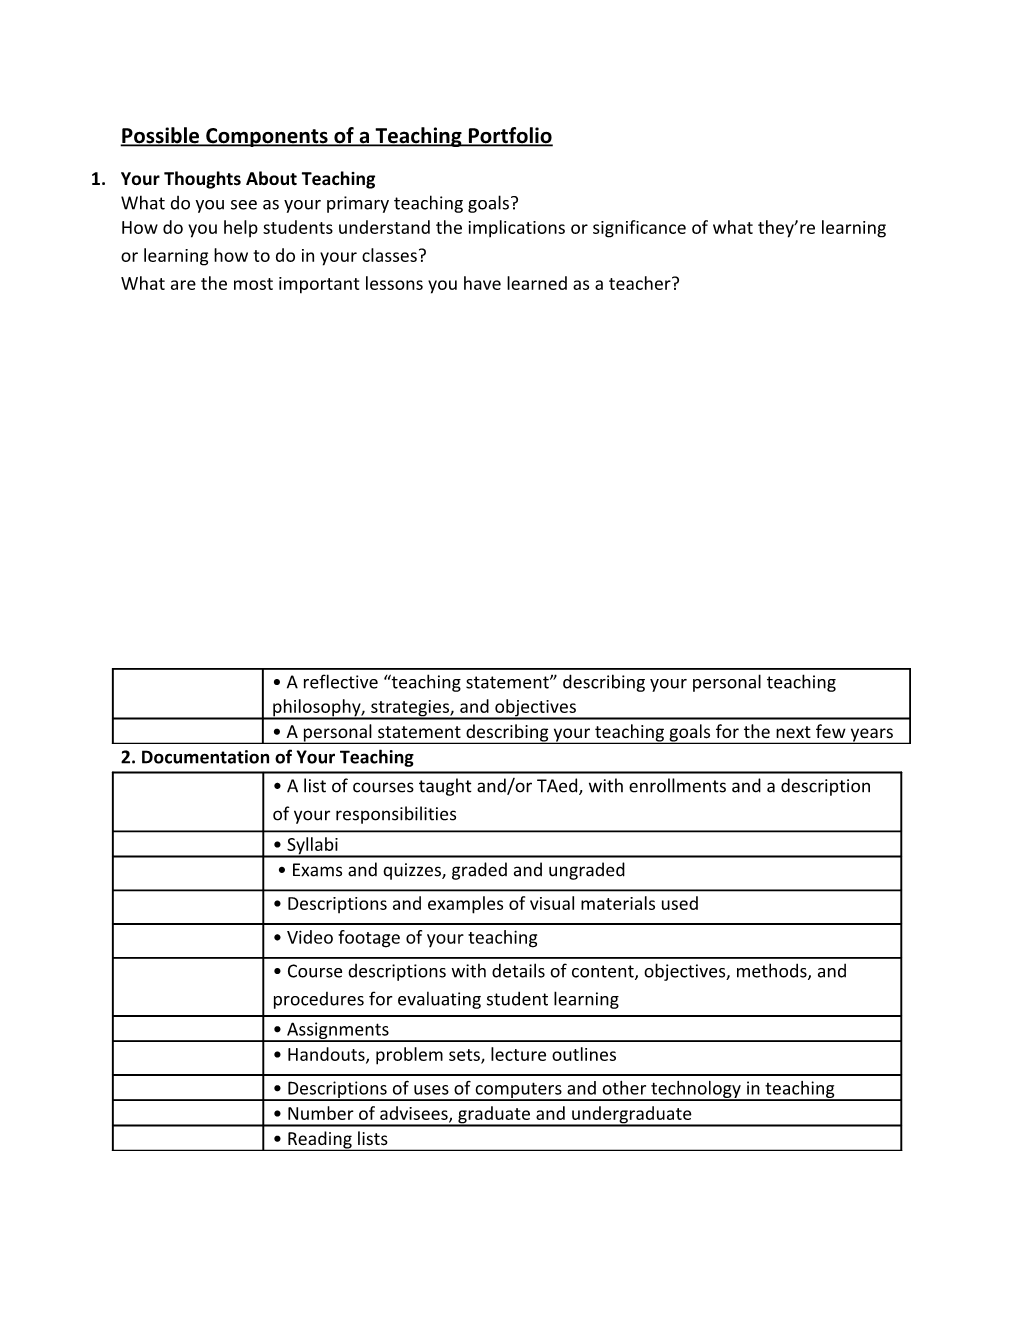 Possible Components of a Teaching Portfolio